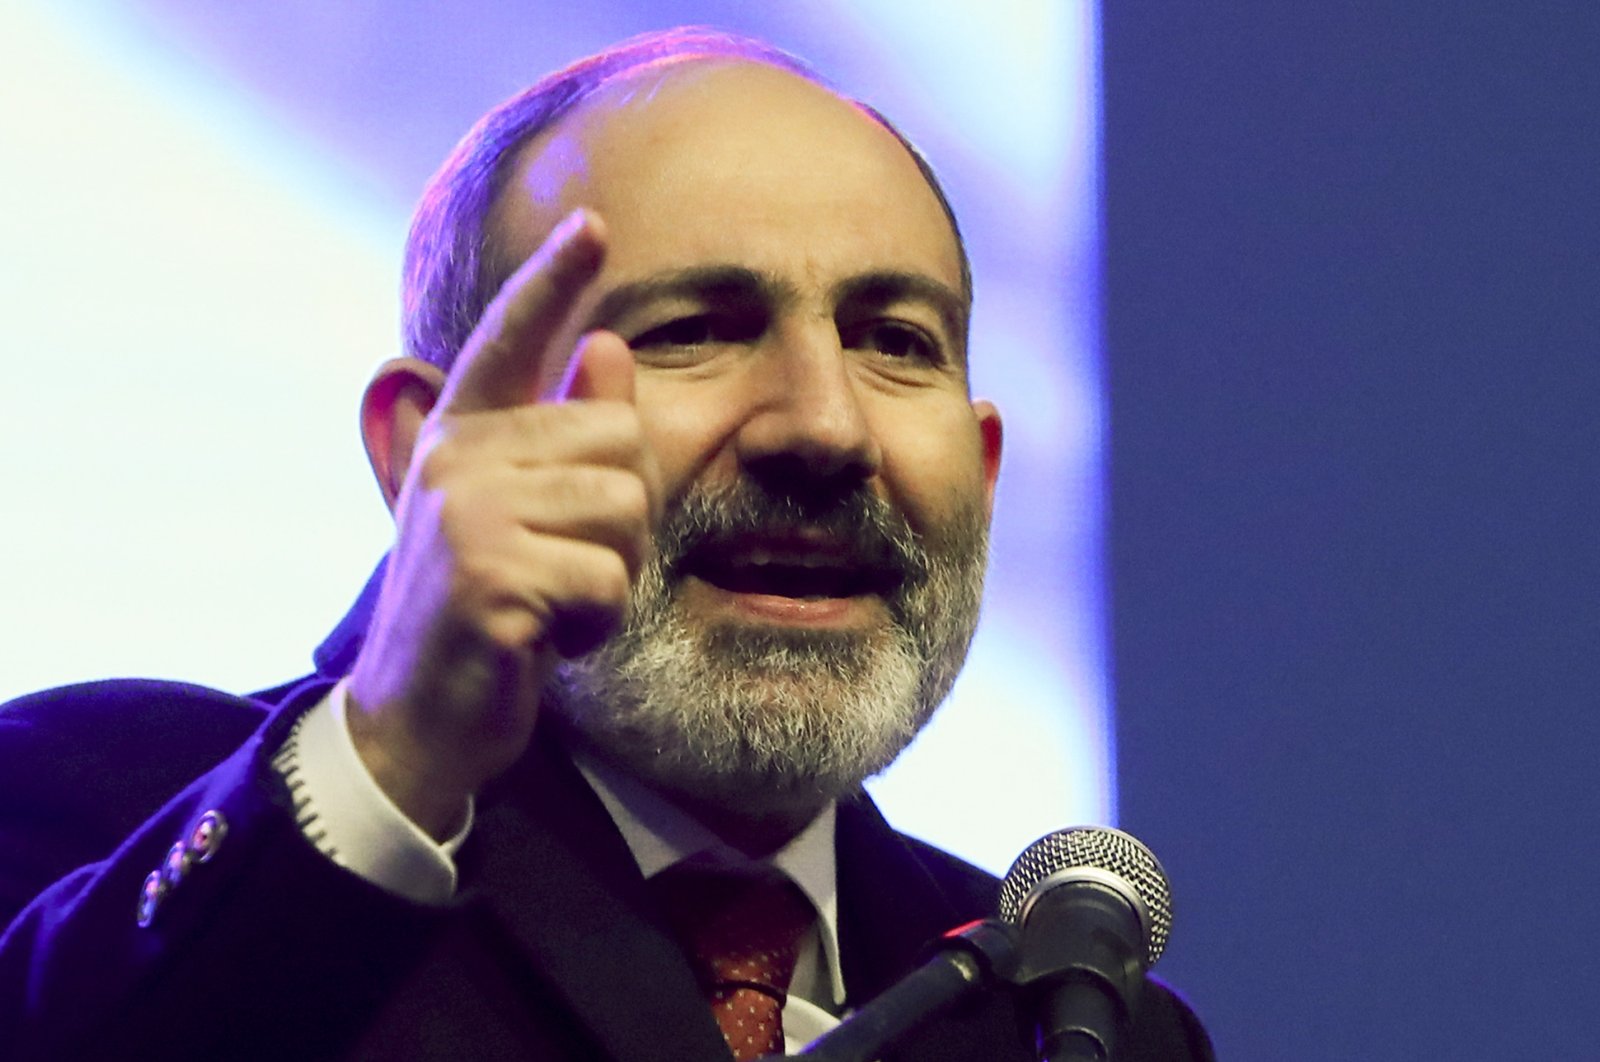 Armenian Prime Minister Nikol Pashinian gestures while addressing his supporters during a rally in his support in the center of Yerevan, Armenia, Monday, March 1, 2021. (AP Photo)